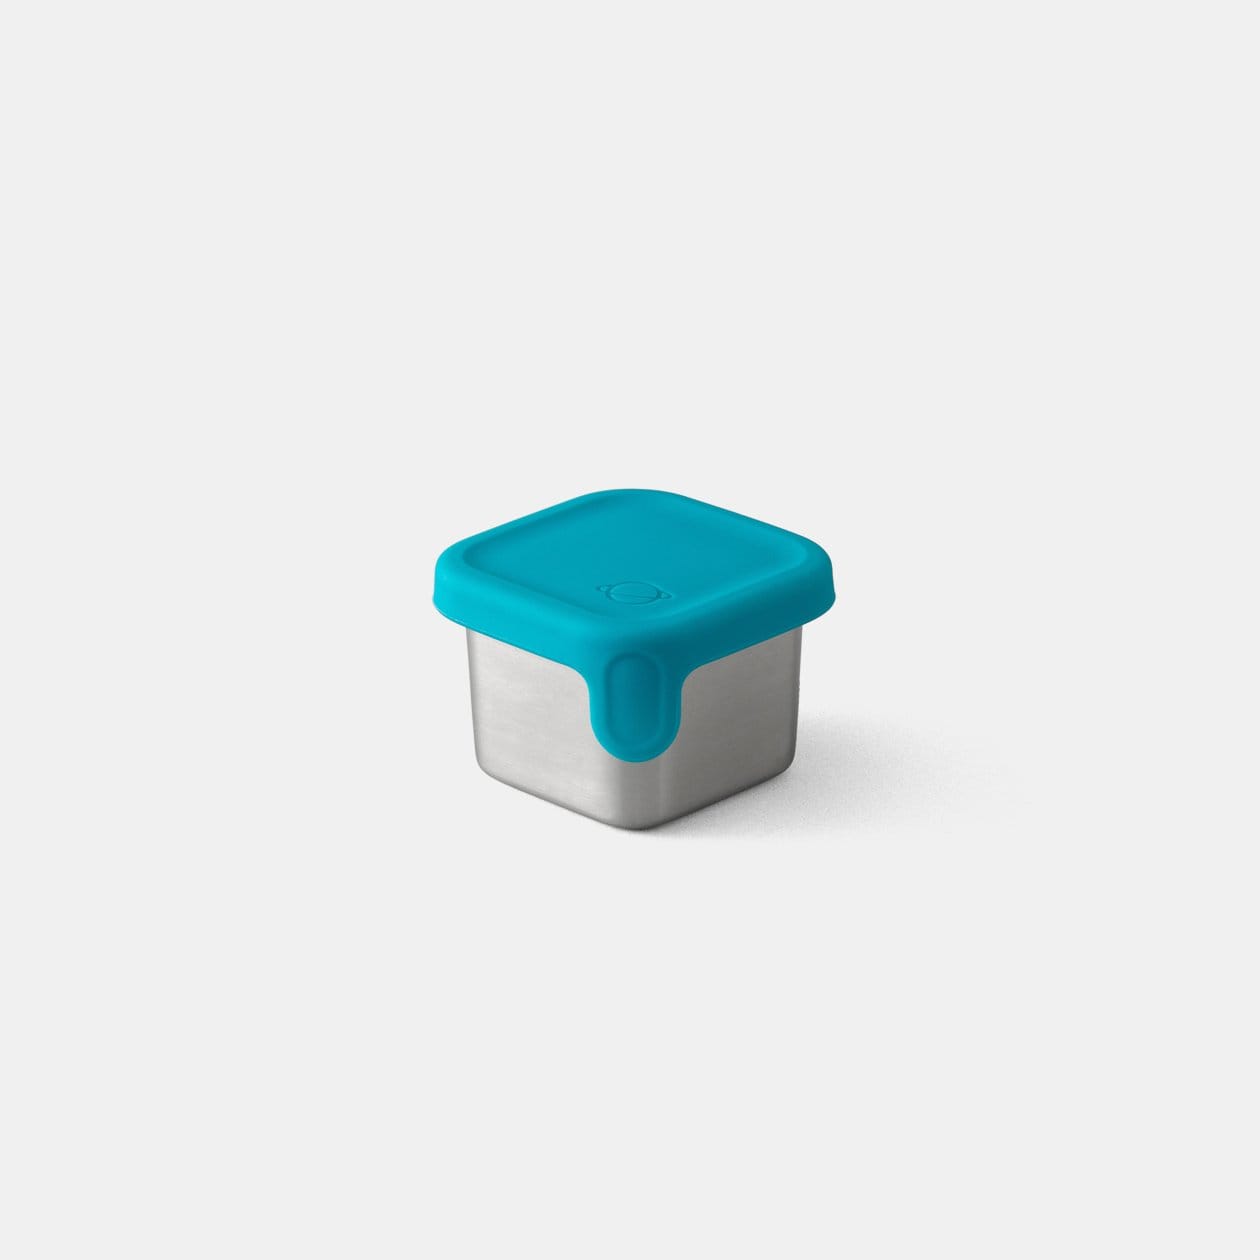 Planet Box Rover Little Square Dipper "Teal"